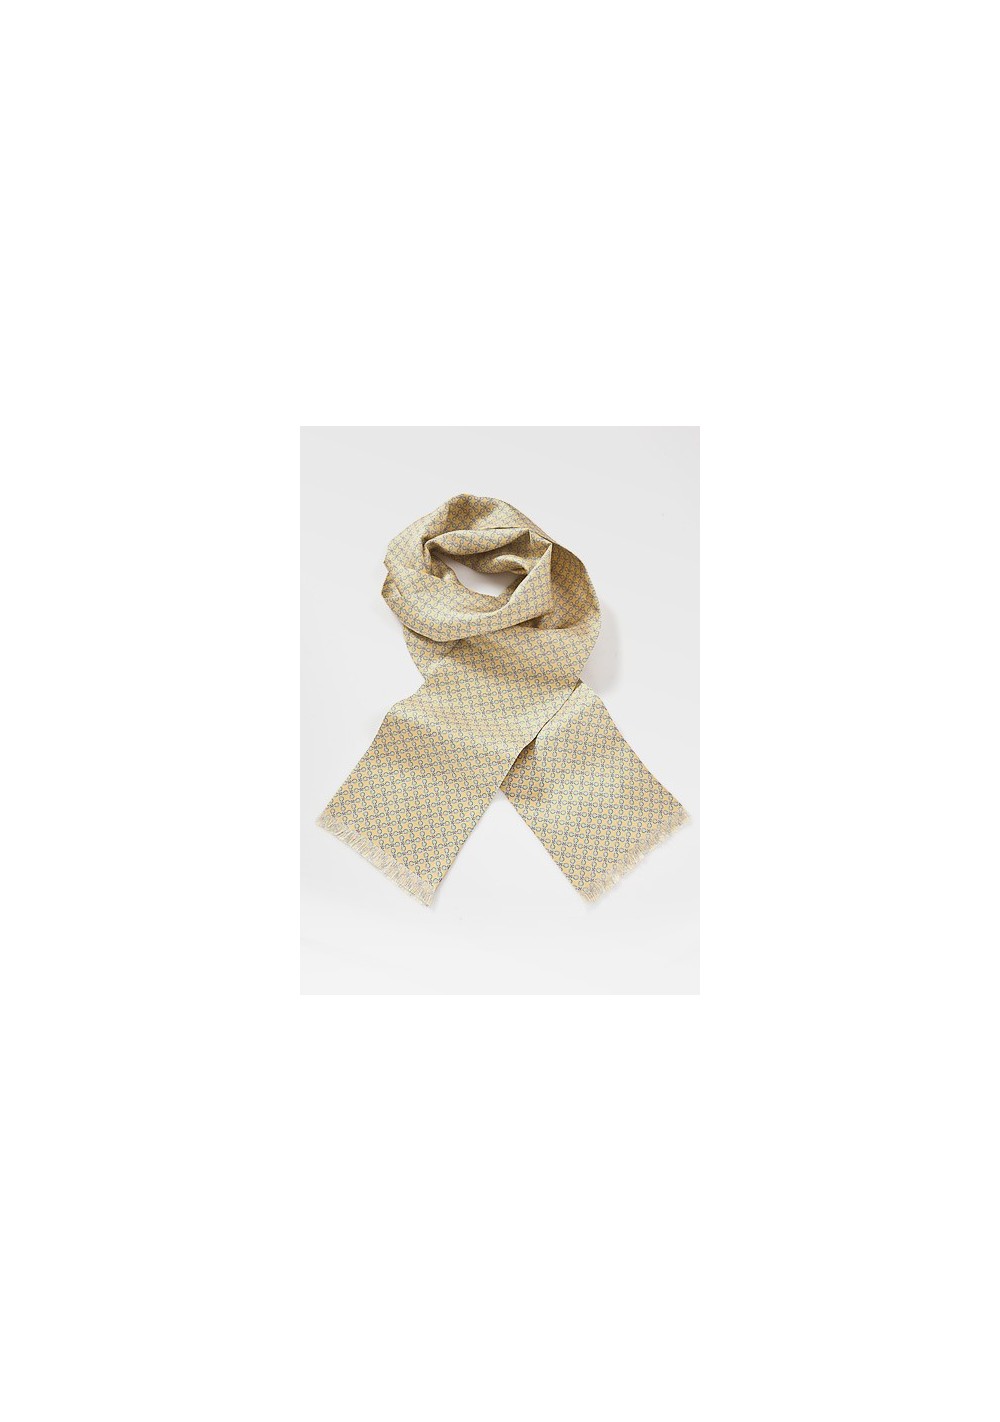 Men's Scarf in Soft Yellows and Blues